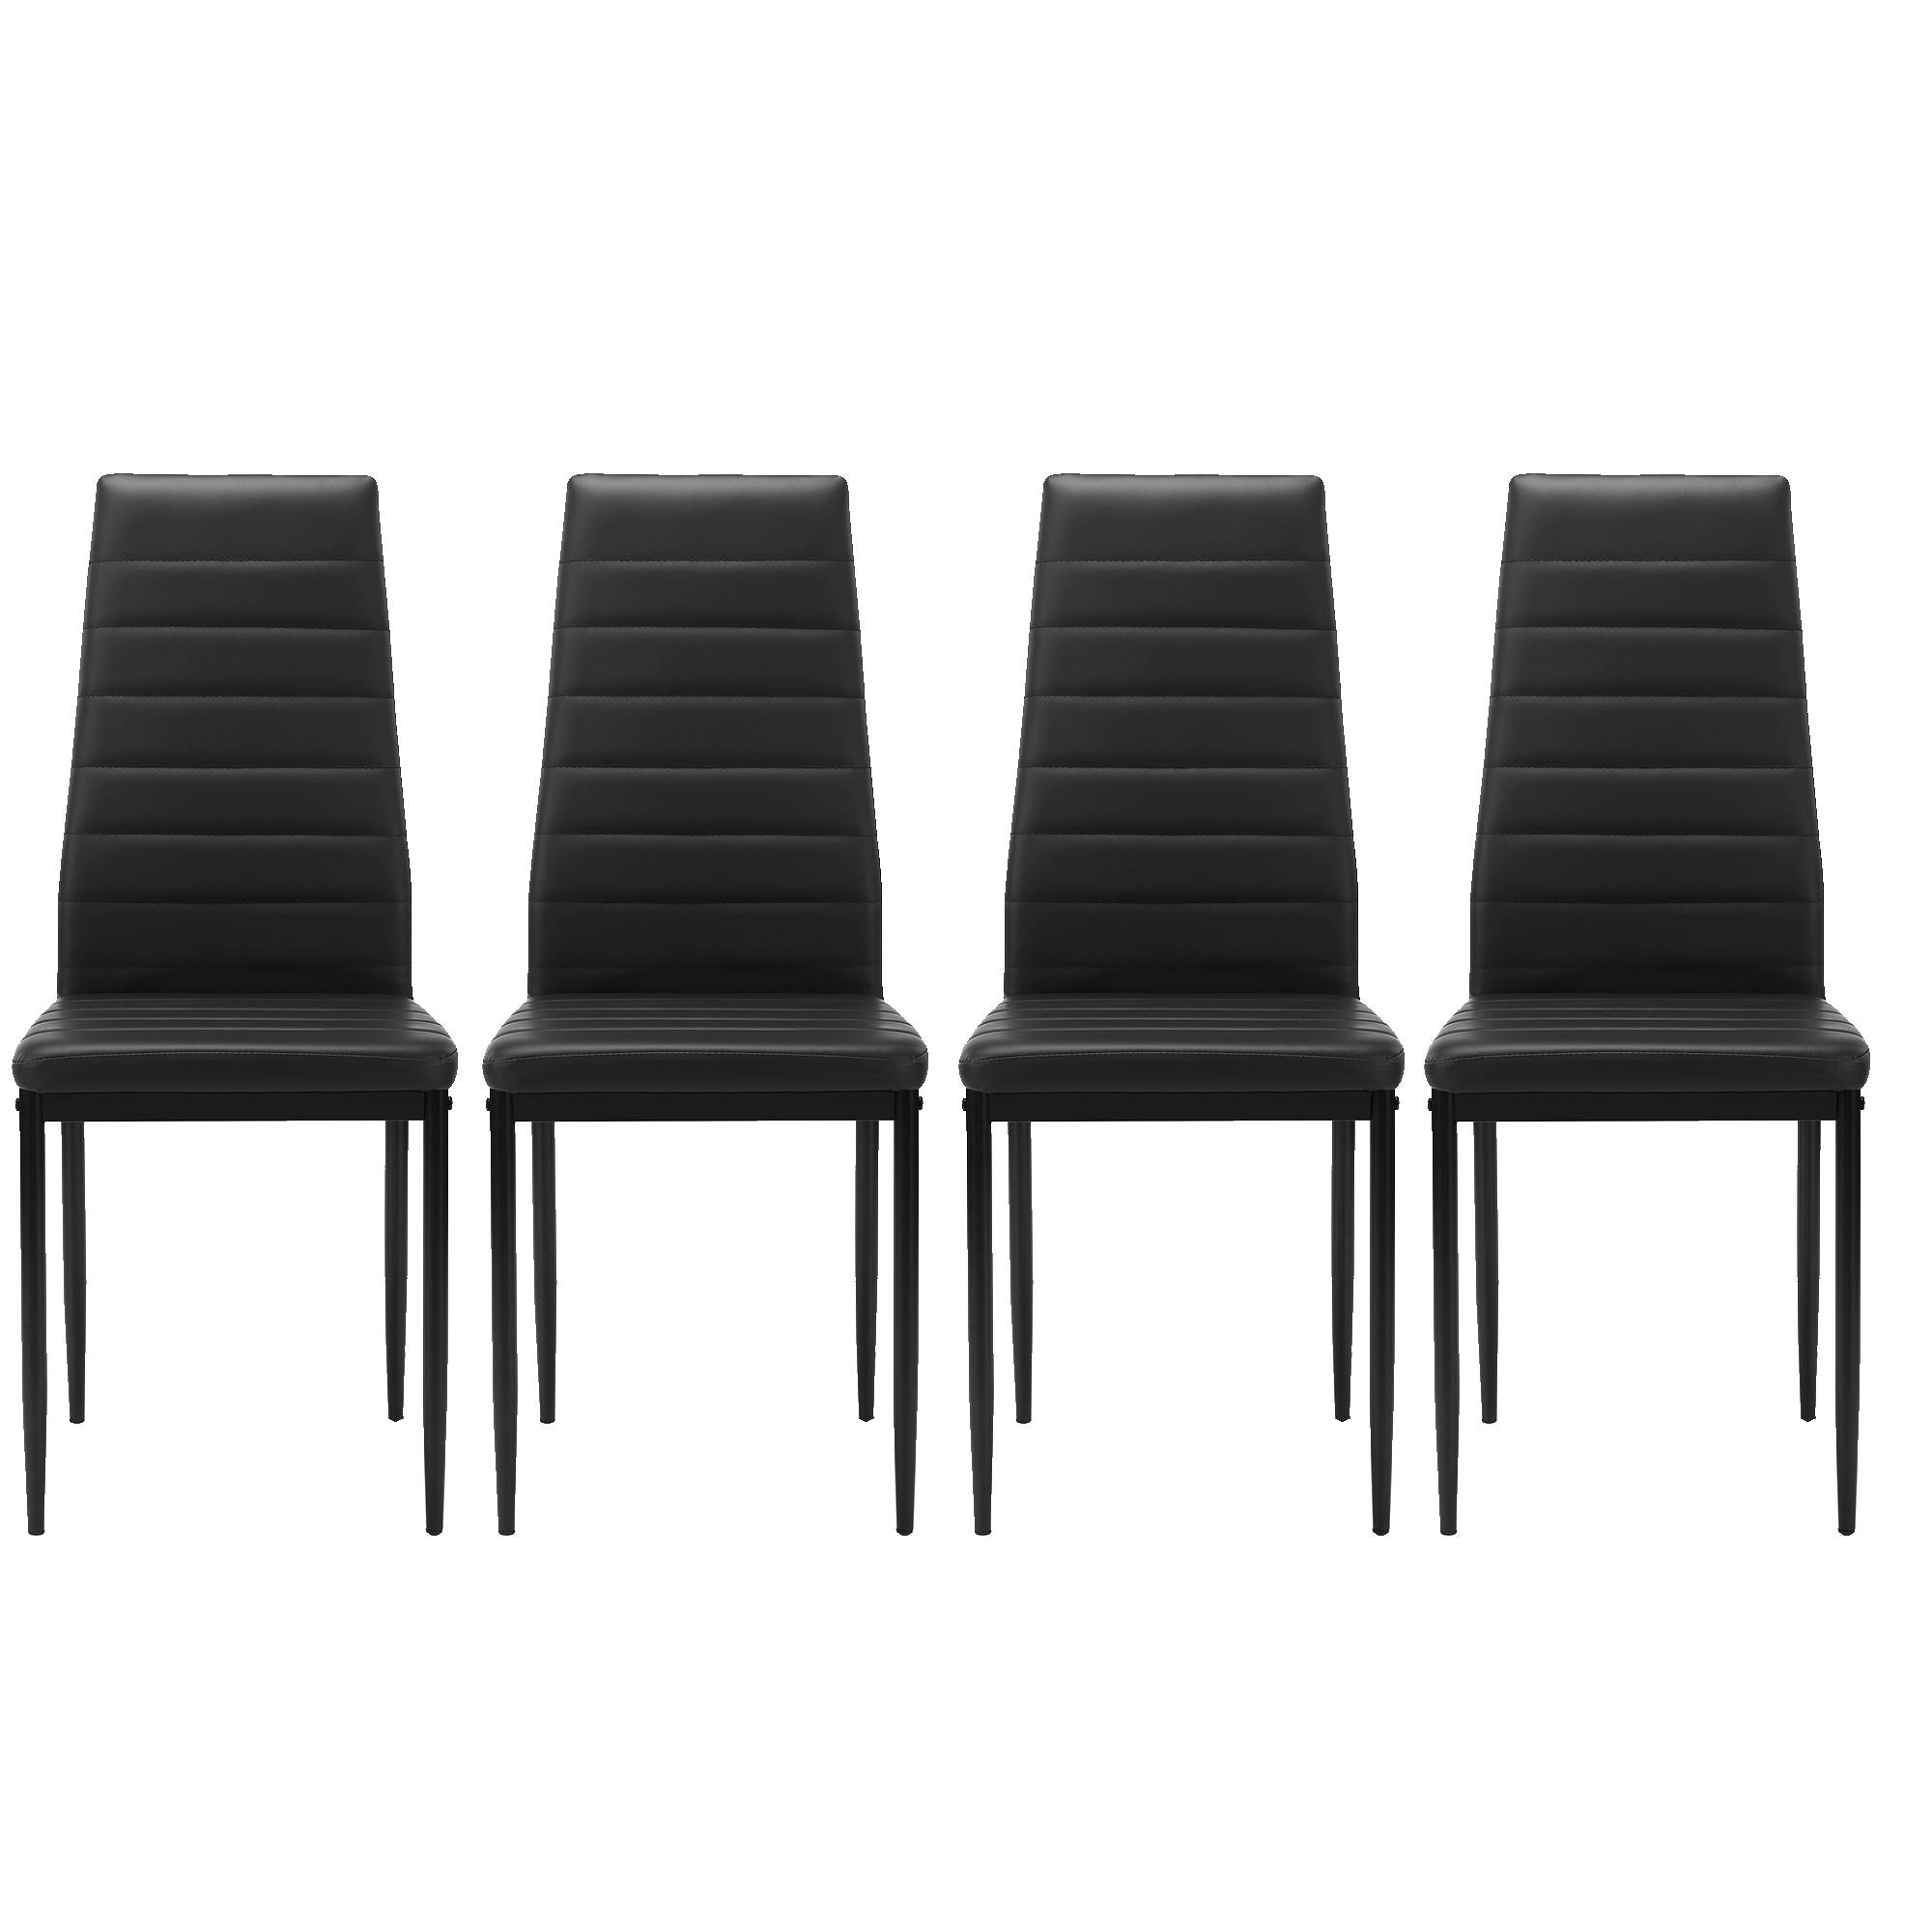 Invite your guests to a comfortable and stylish dining experience with these 4 black dining chairs. Enjoy the perfect balance of luxury and convenience!